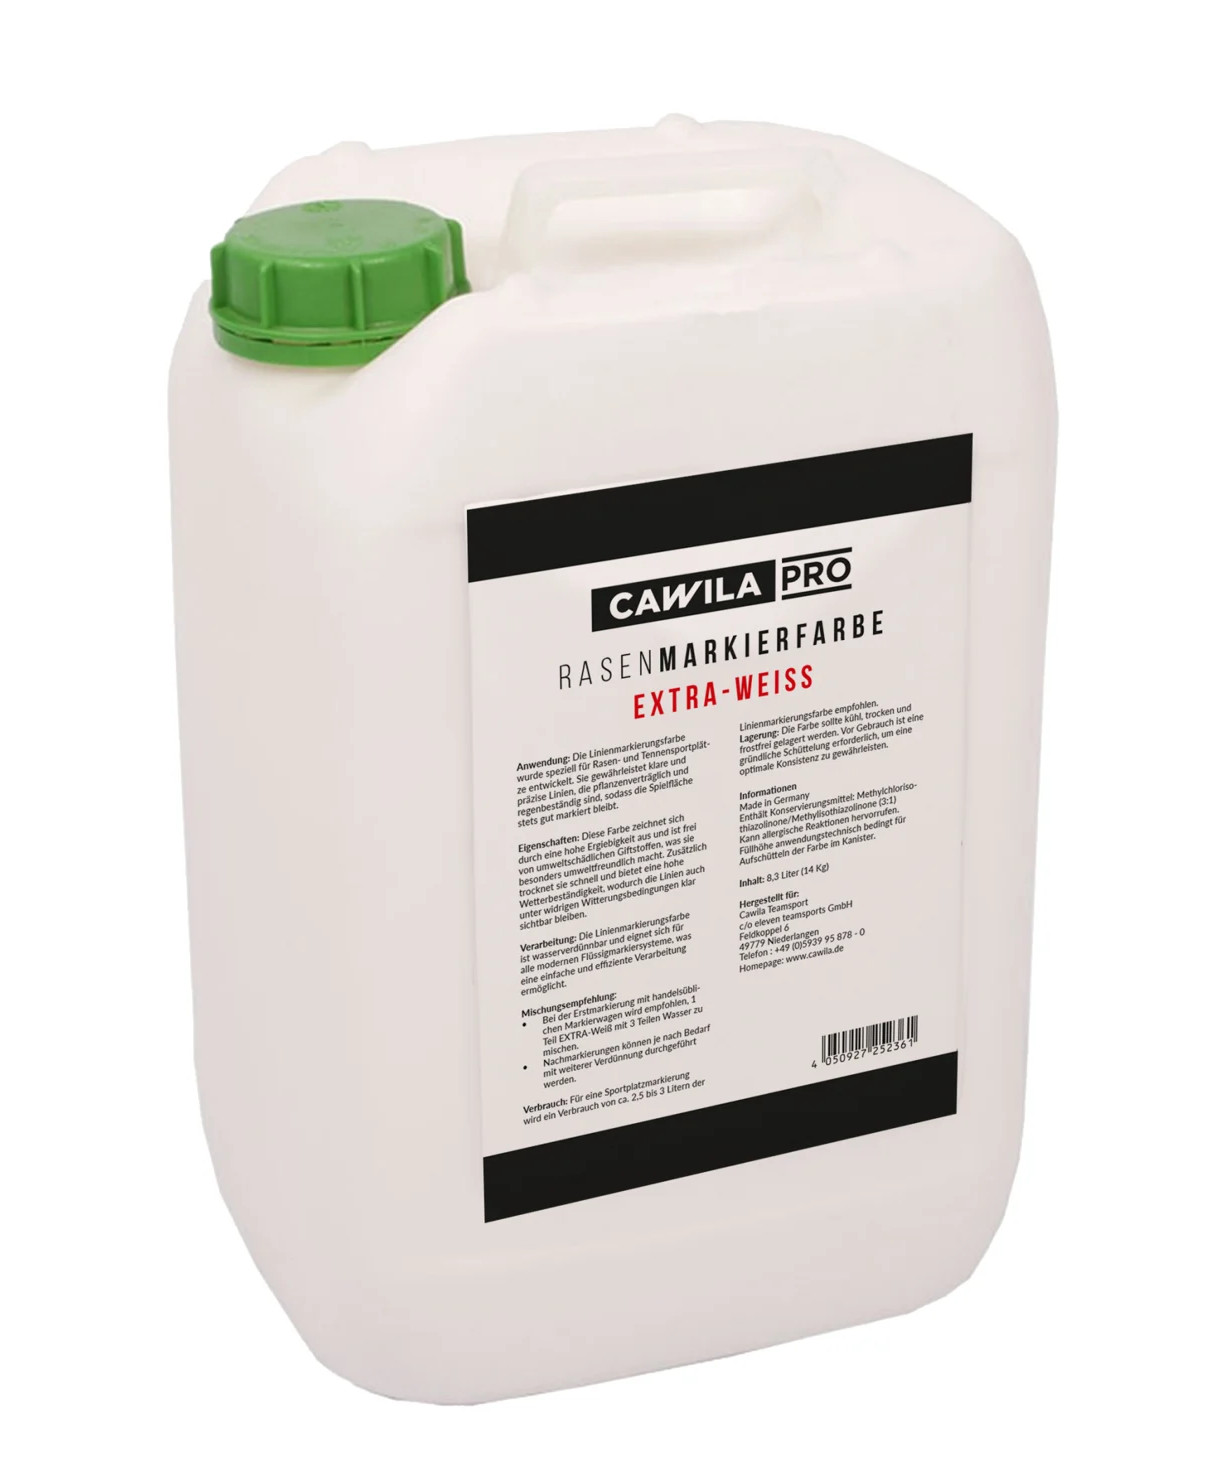 Markeringslijnen Cawila Extra-White Concentrate | Turf marking paint for sports fields